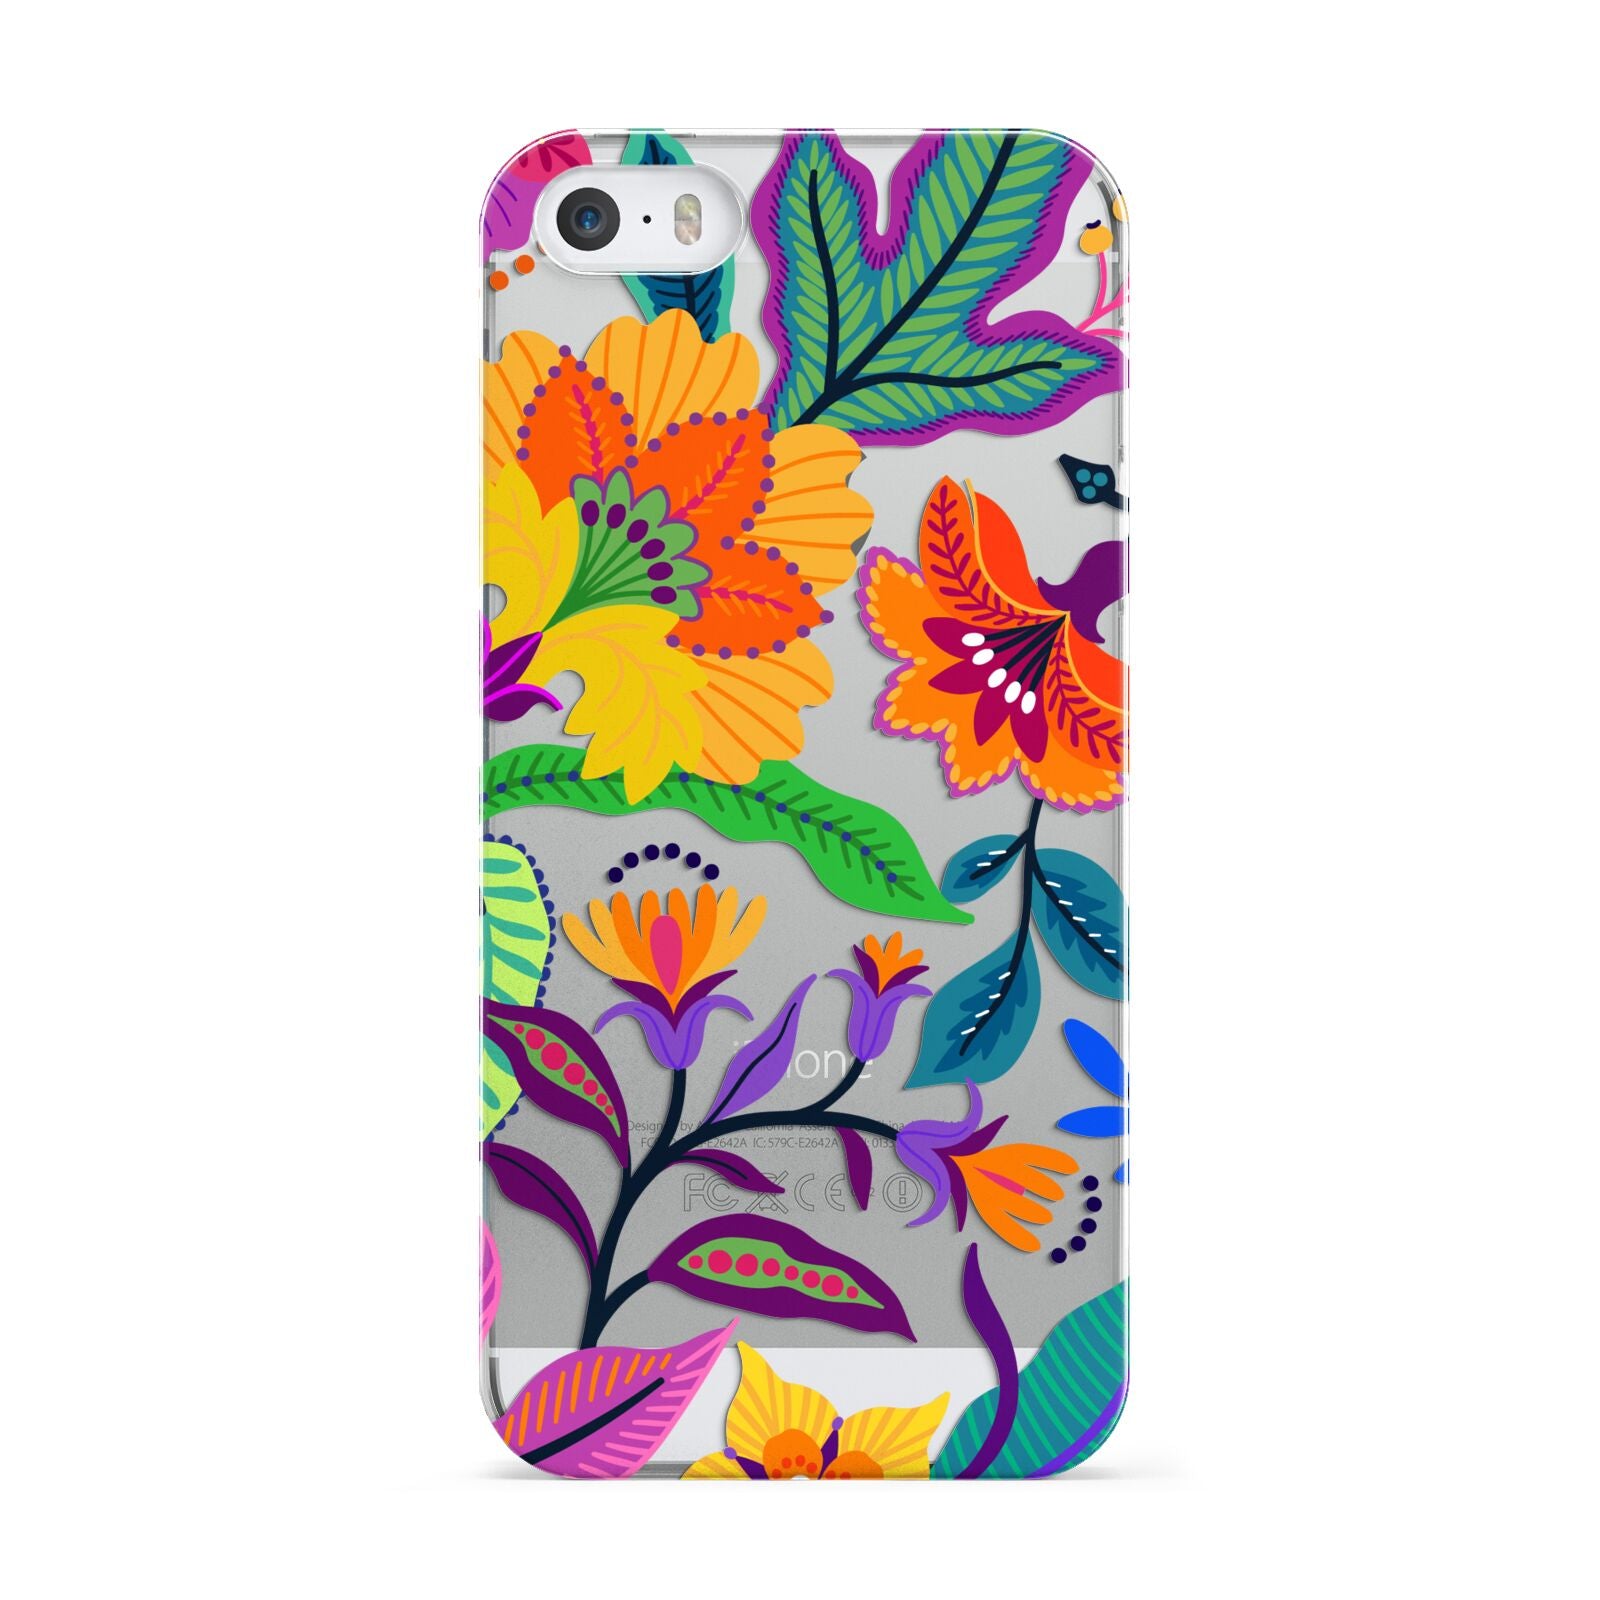 Tropical Floral Apple iPhone 5 Case